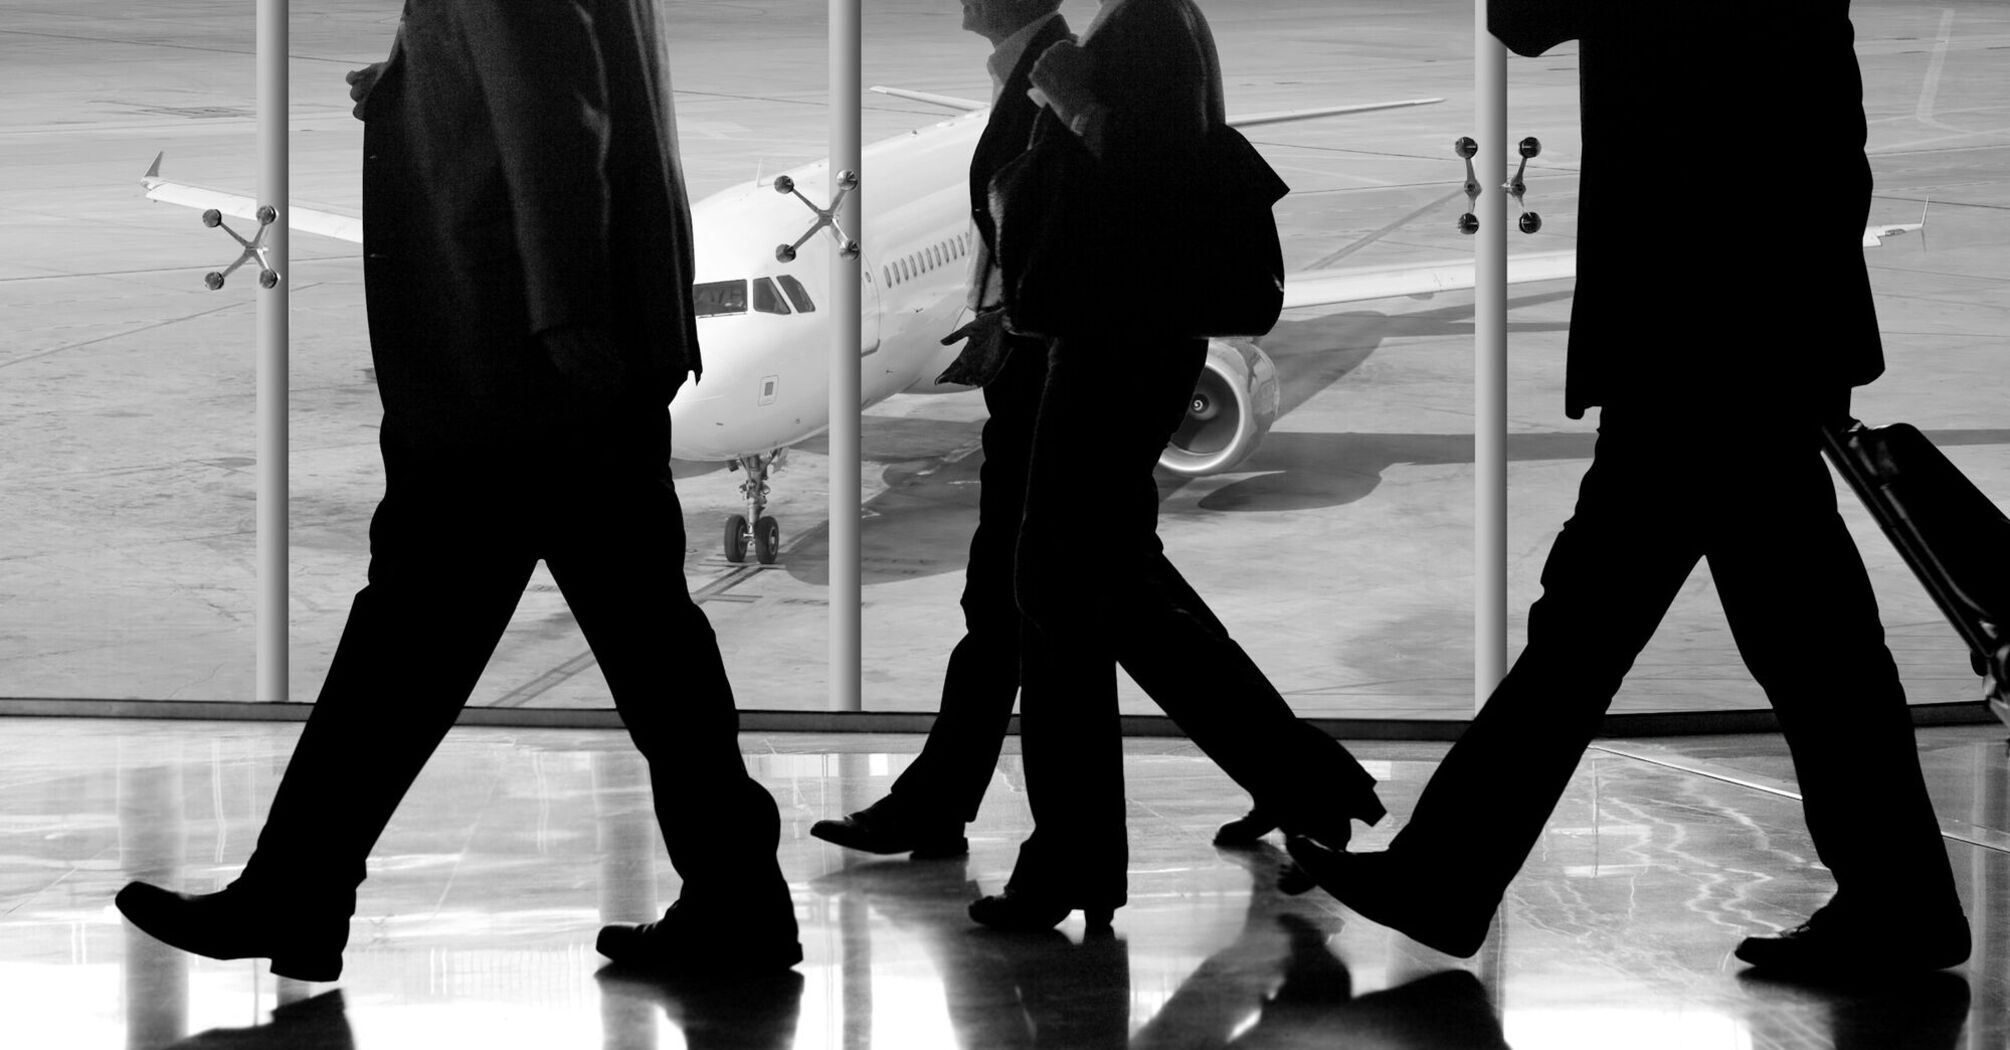 Travelers walking in an airport terminal with a plane in the background